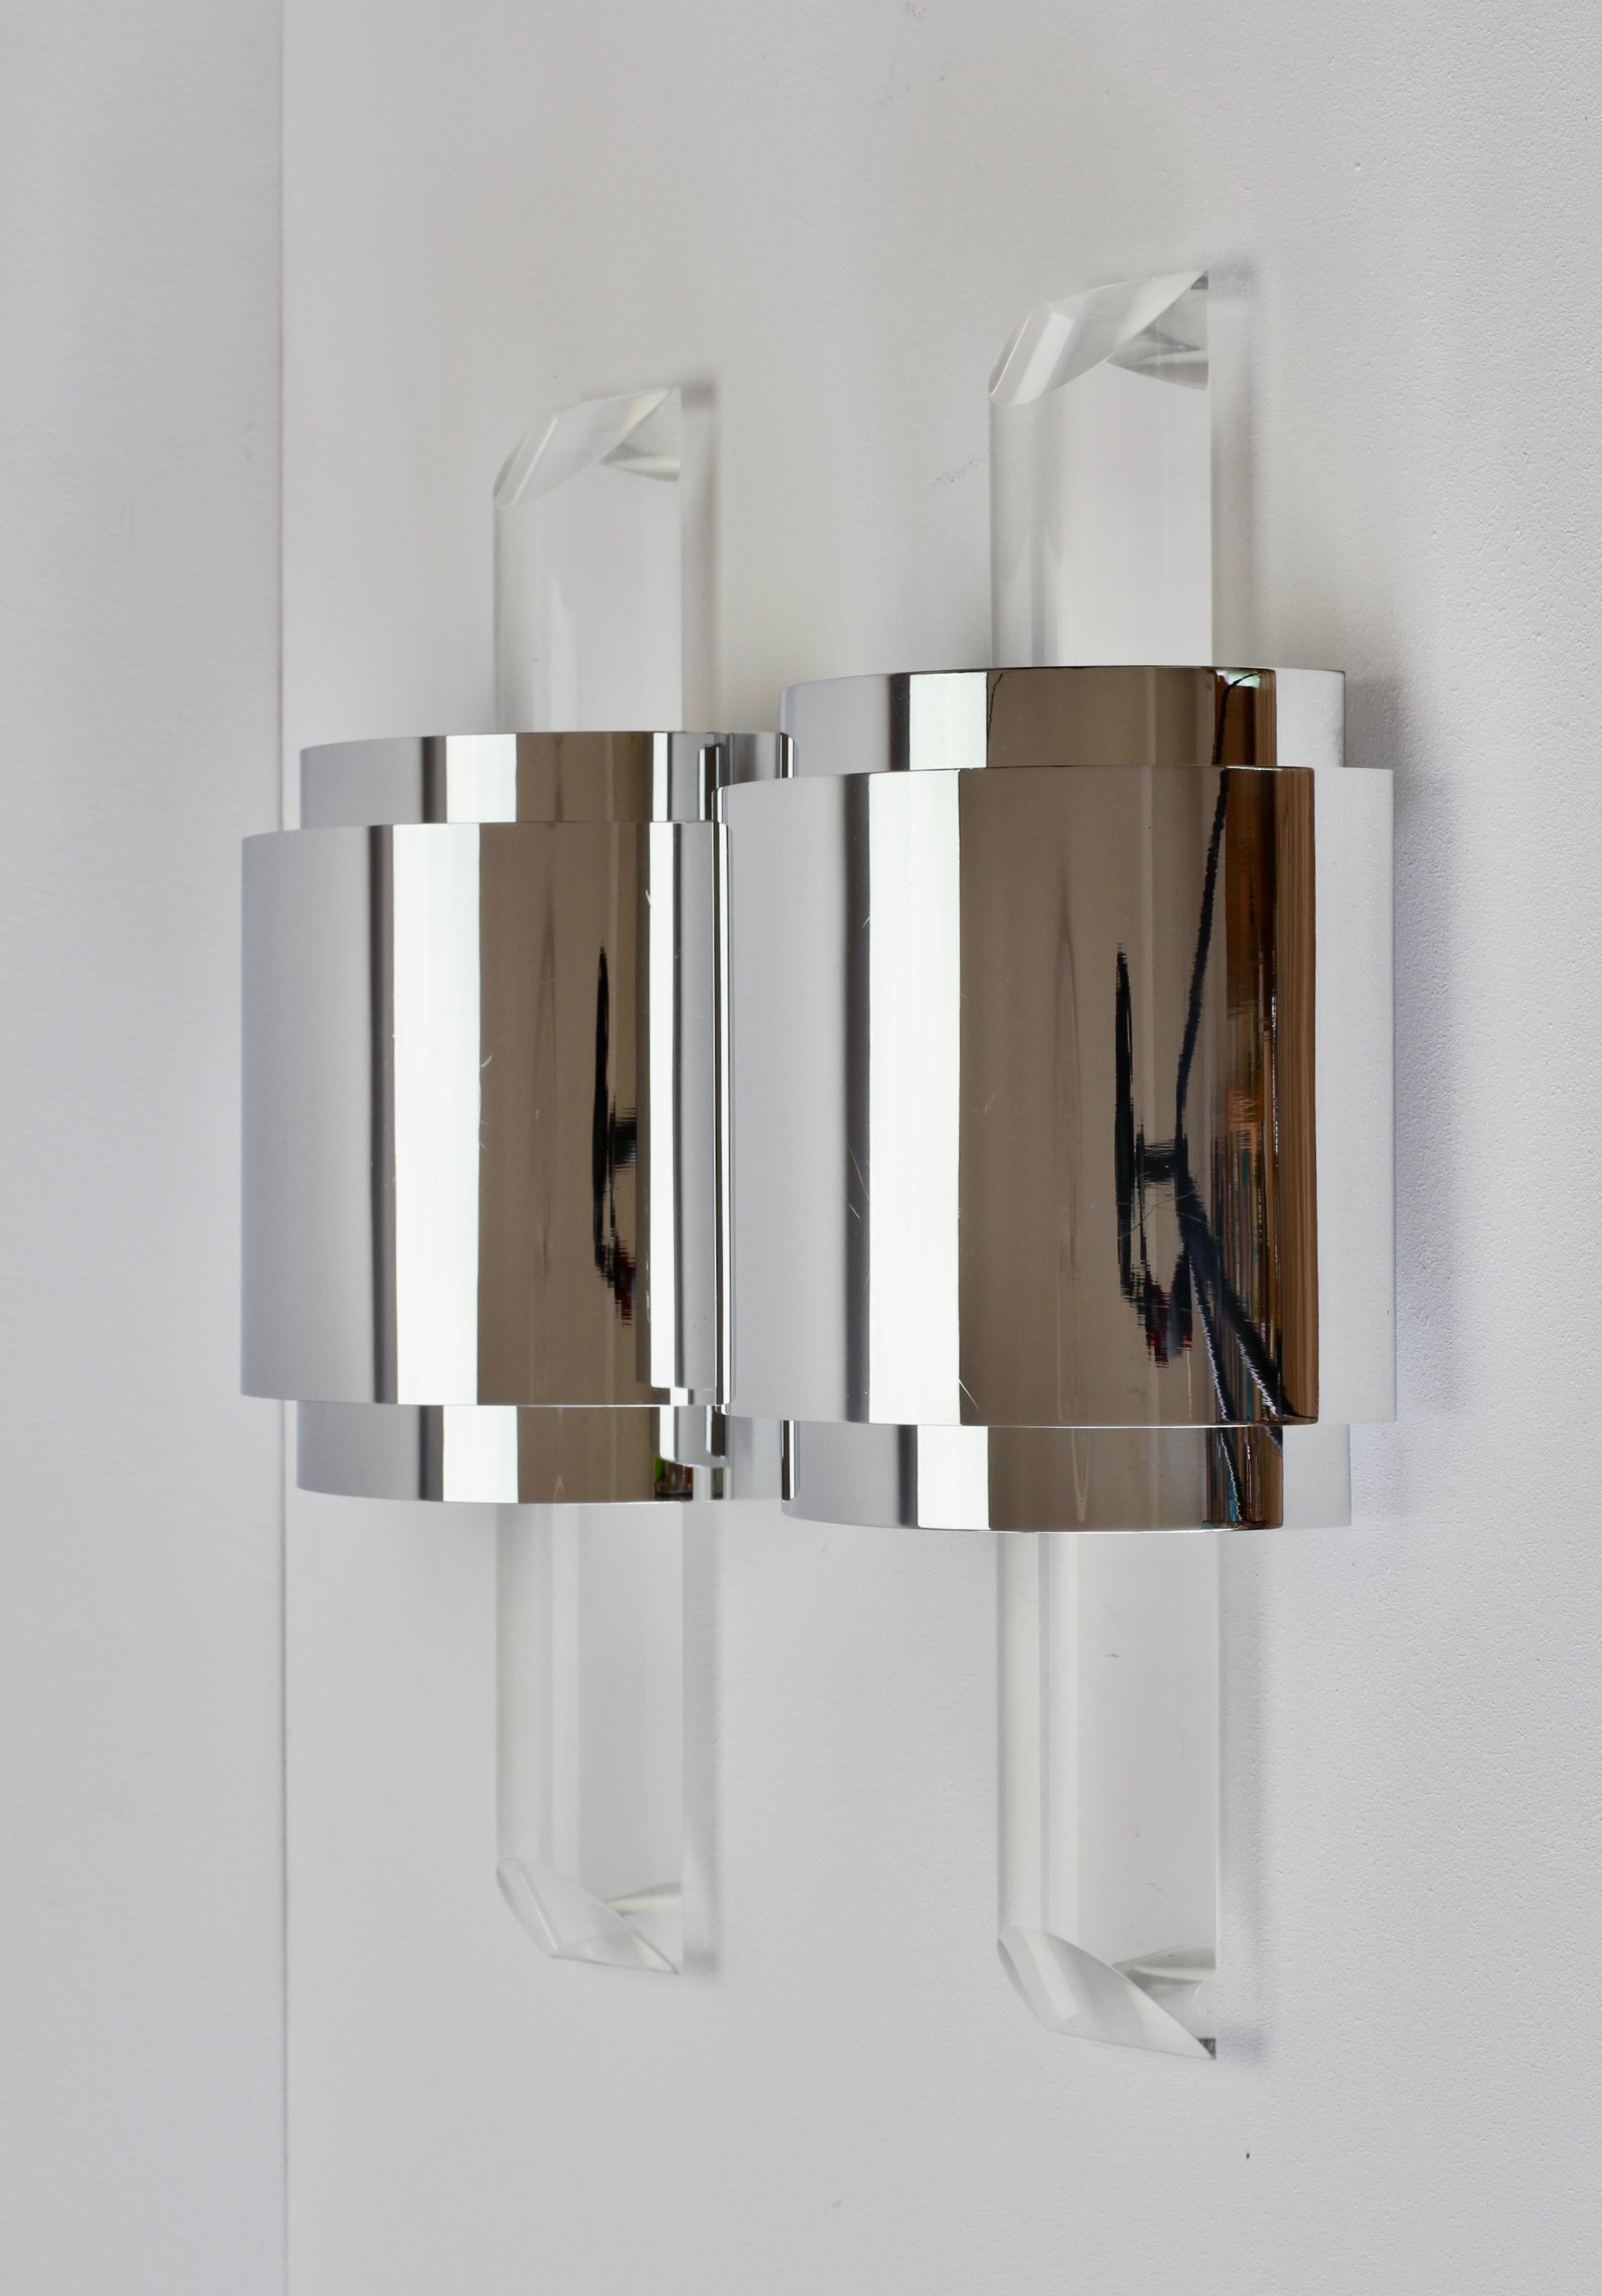 Large Hollywood Regency Lucite and Chrome Wall Lights or Sconces, circa 1970s For Sale 3